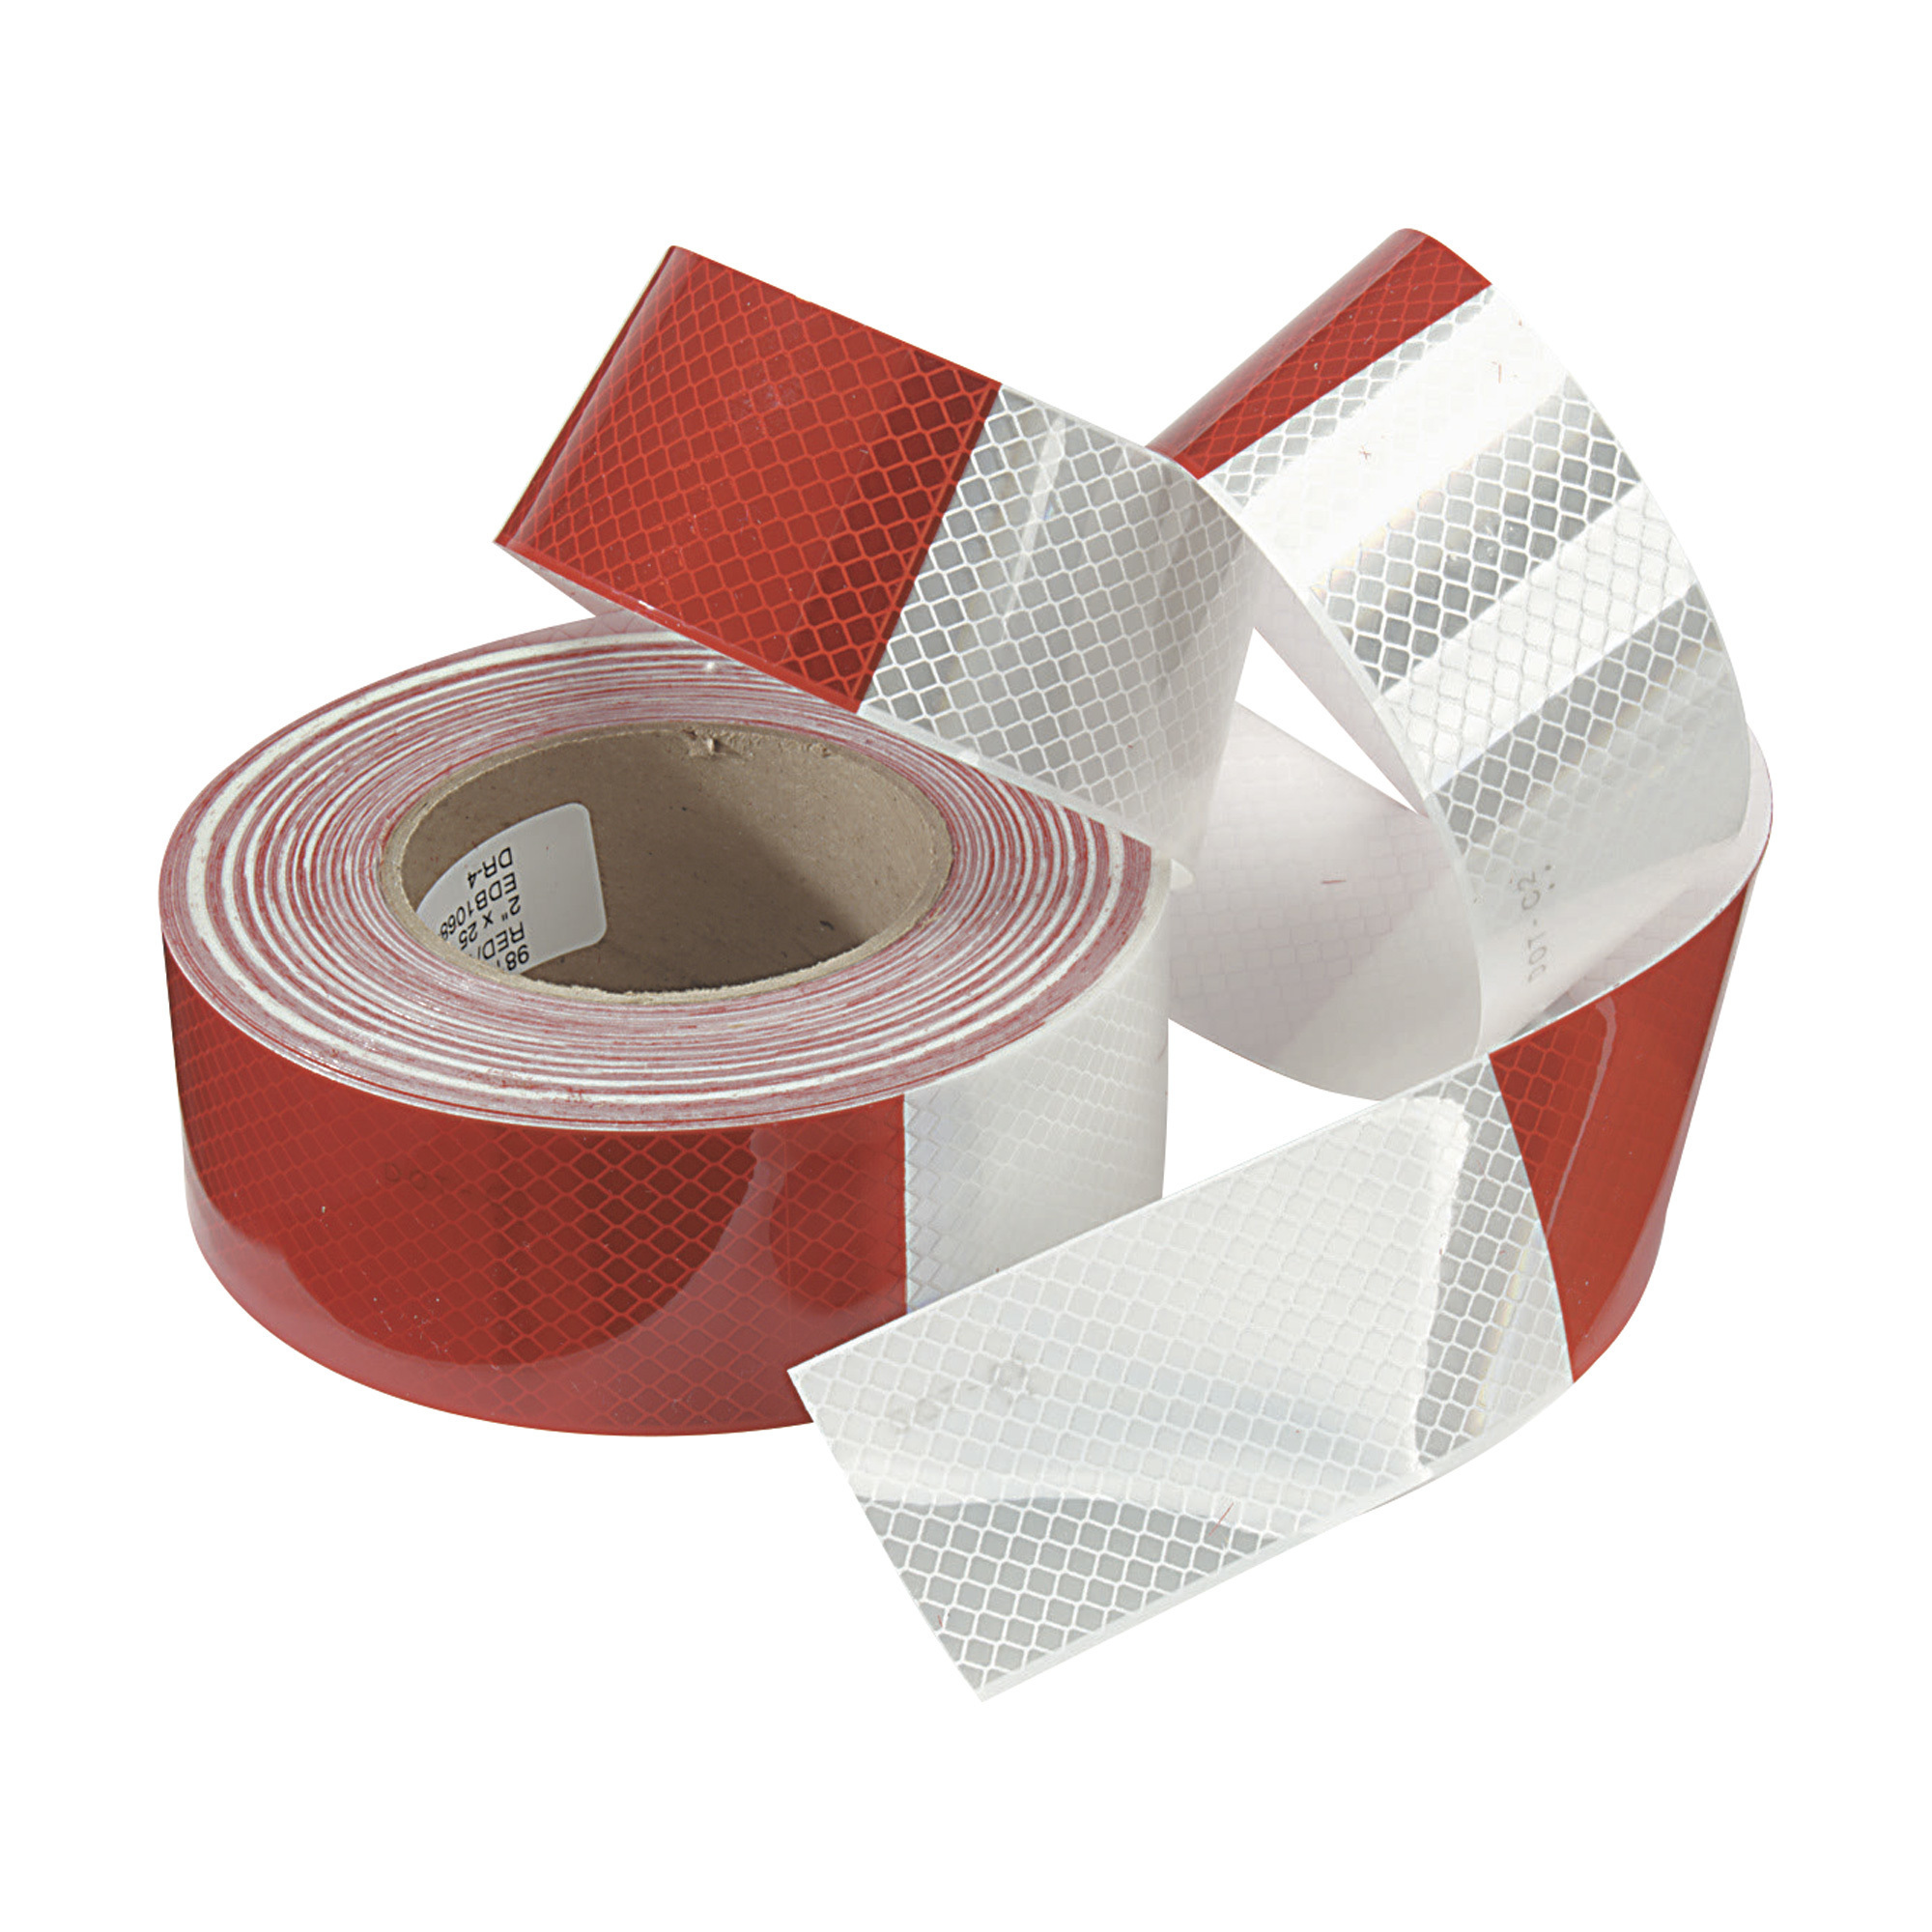 3M Reflective Tape — Roll of 50 Yards, Model# 67535